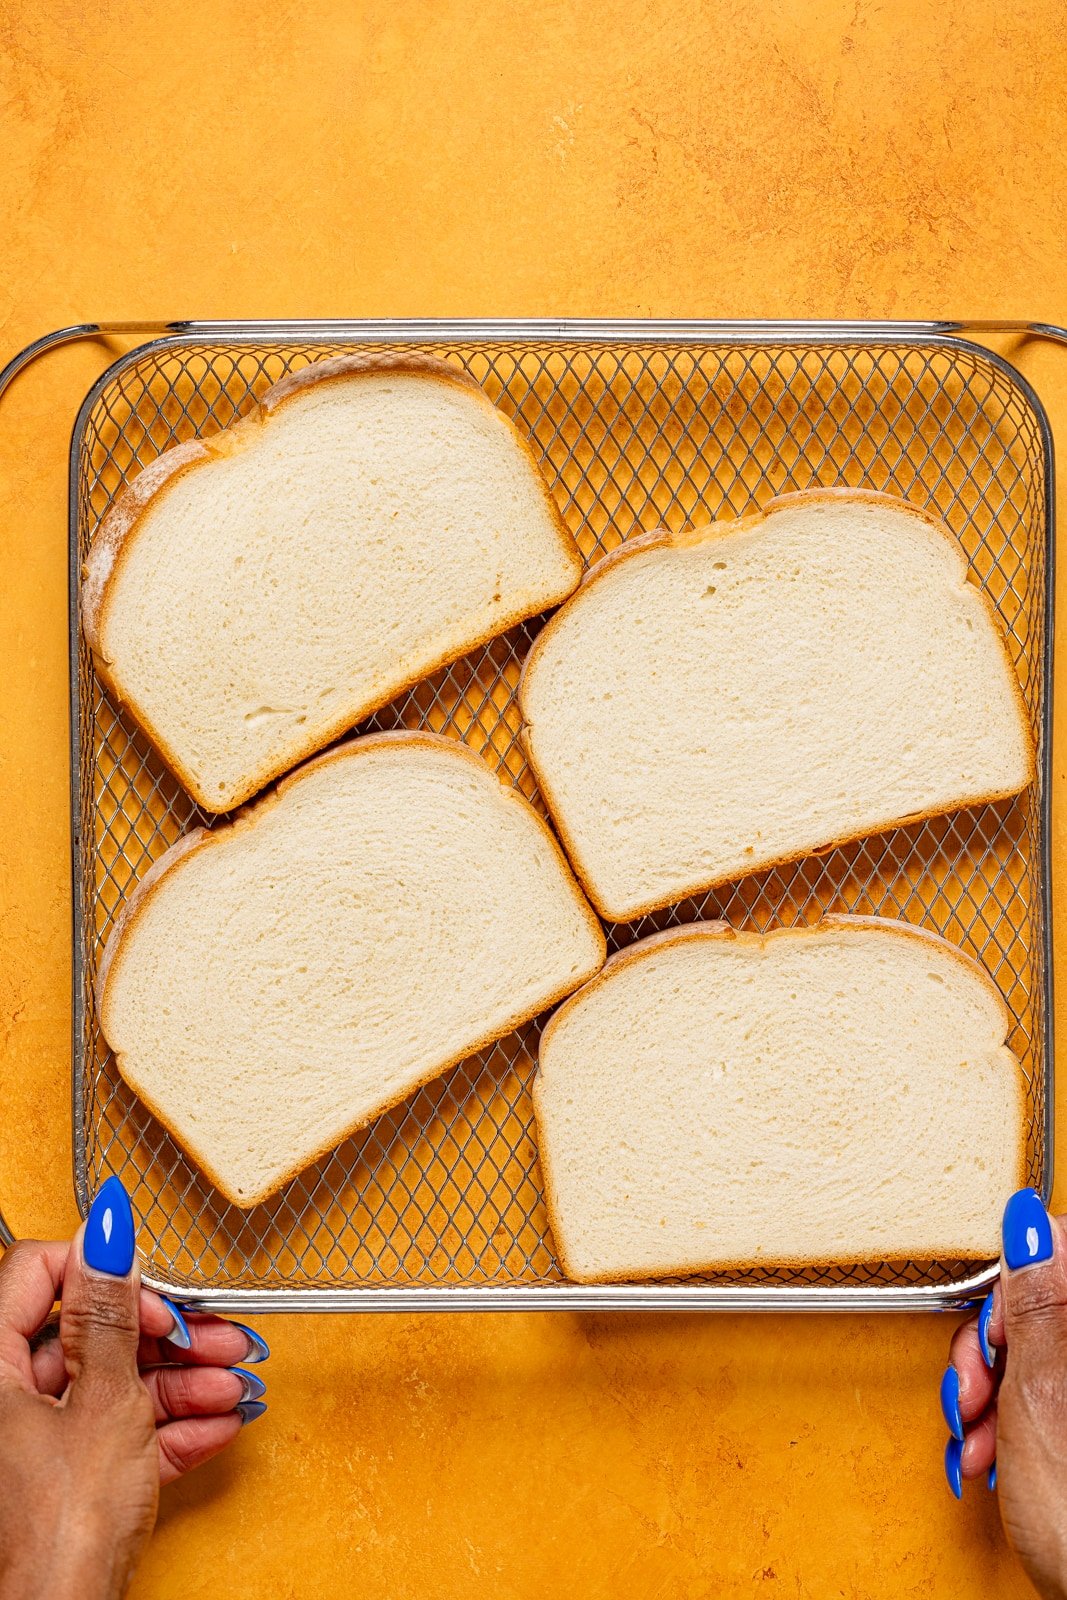 Slices of bread in an Air Fryer basket.